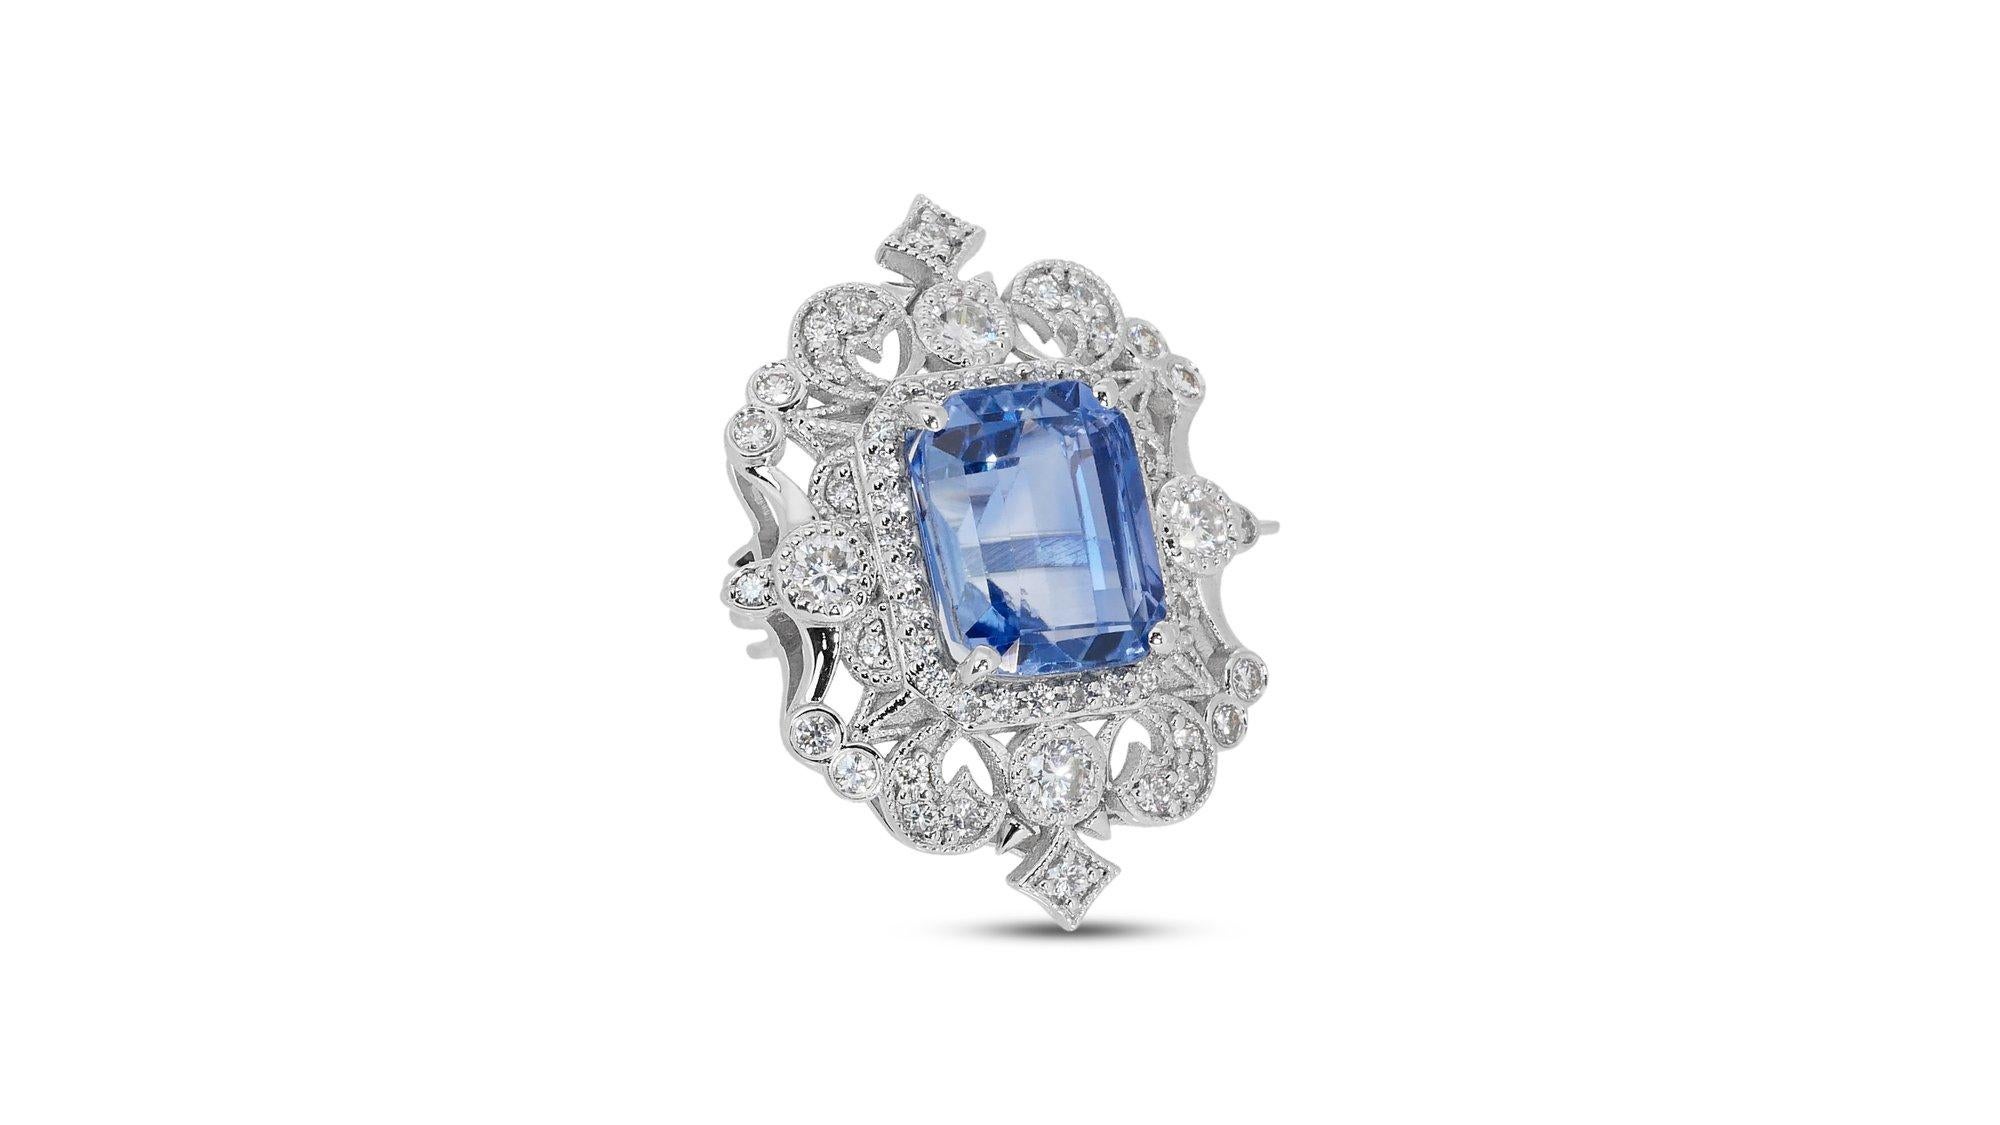 18k White Gold Brooch w/ 5.65 ct Sapphire and Natural Diamonds GIA Certificate For Sale 2